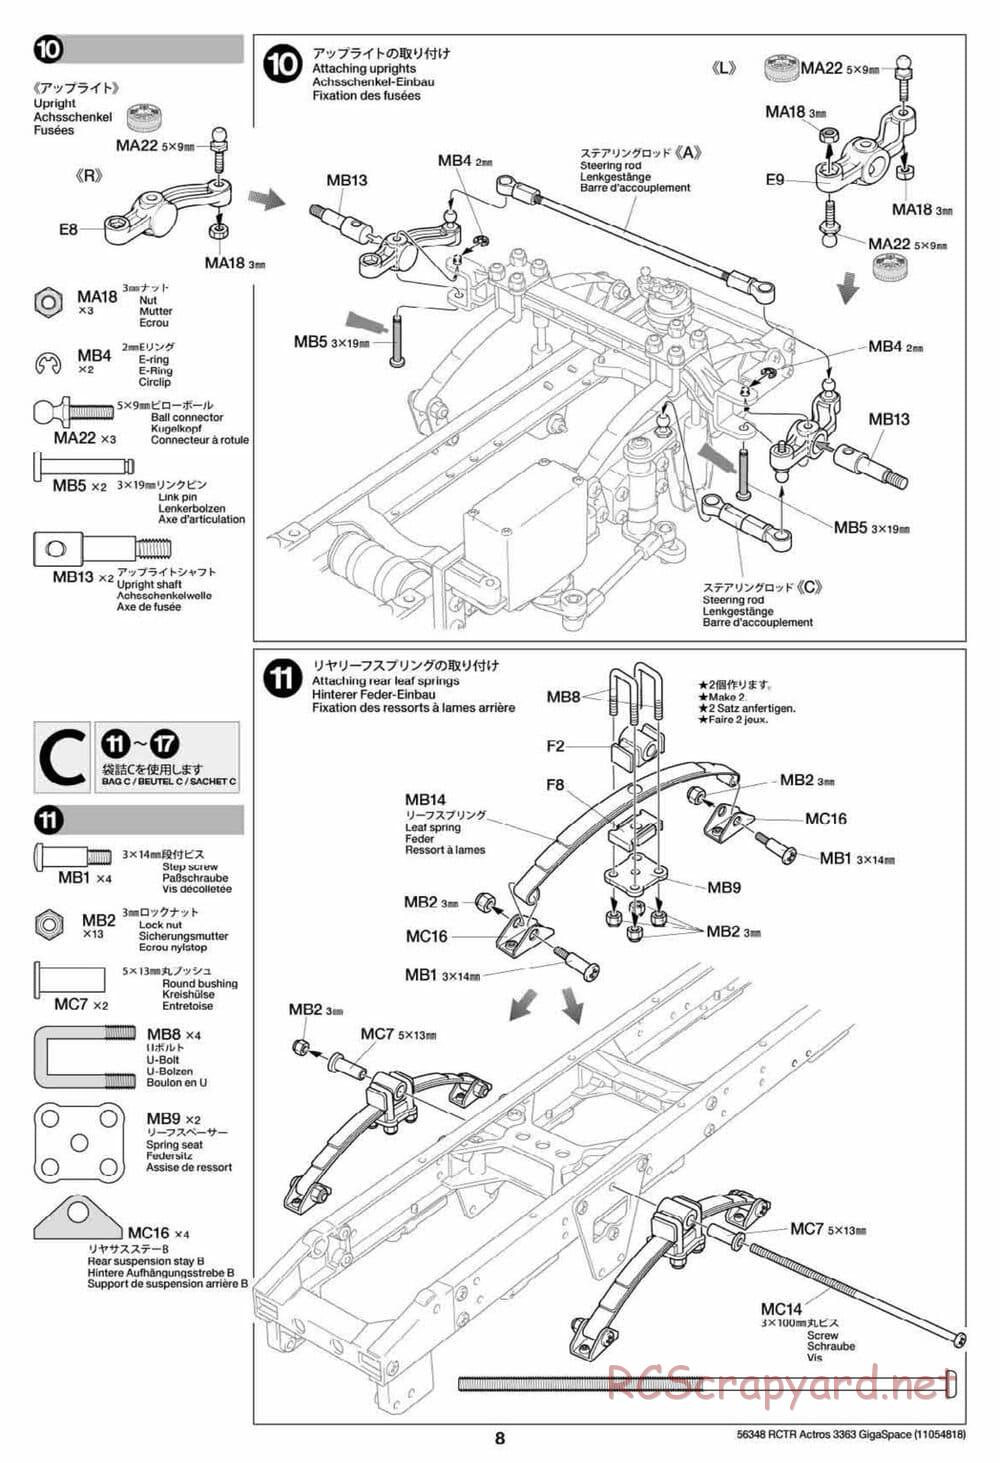 Tamiya - Mercedes-Benz Actros 3363 6x4 GigaSpace Tractor Truck Chassis - Manual - Page 8